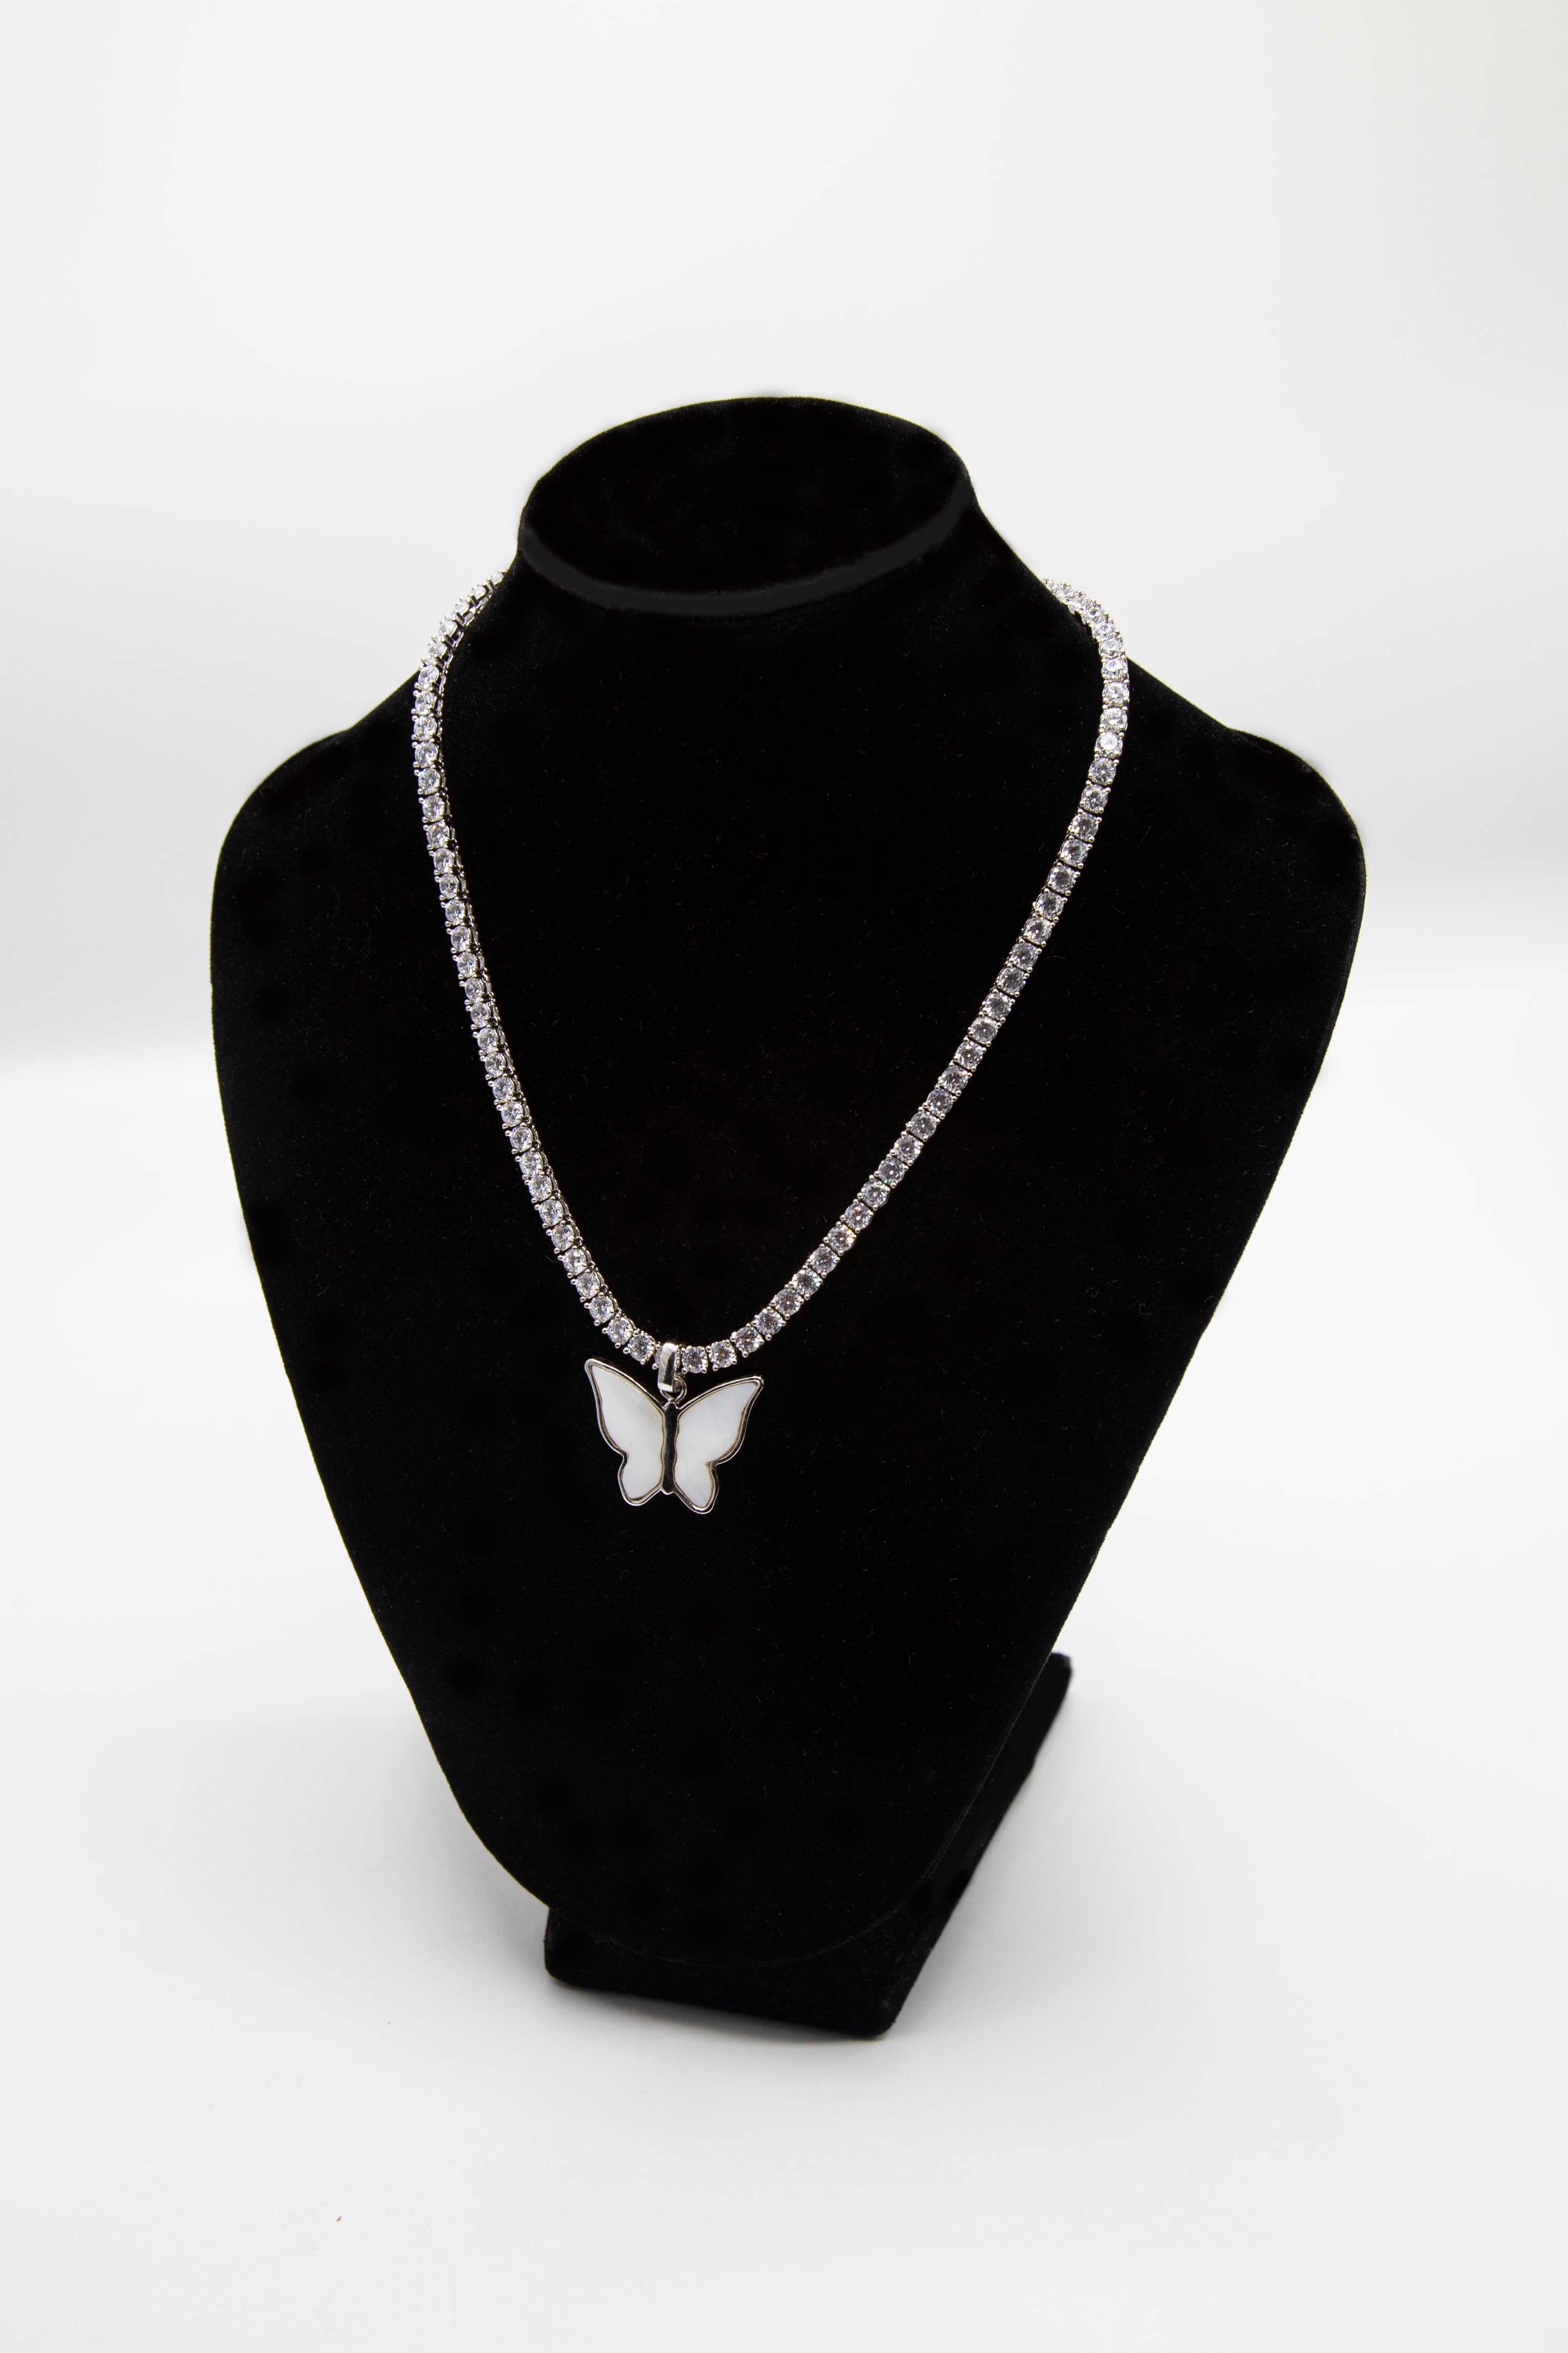 This 18k silver plated chain features a beautiful butterfly design, adding a touch of elegance to any outfit│ E's Element